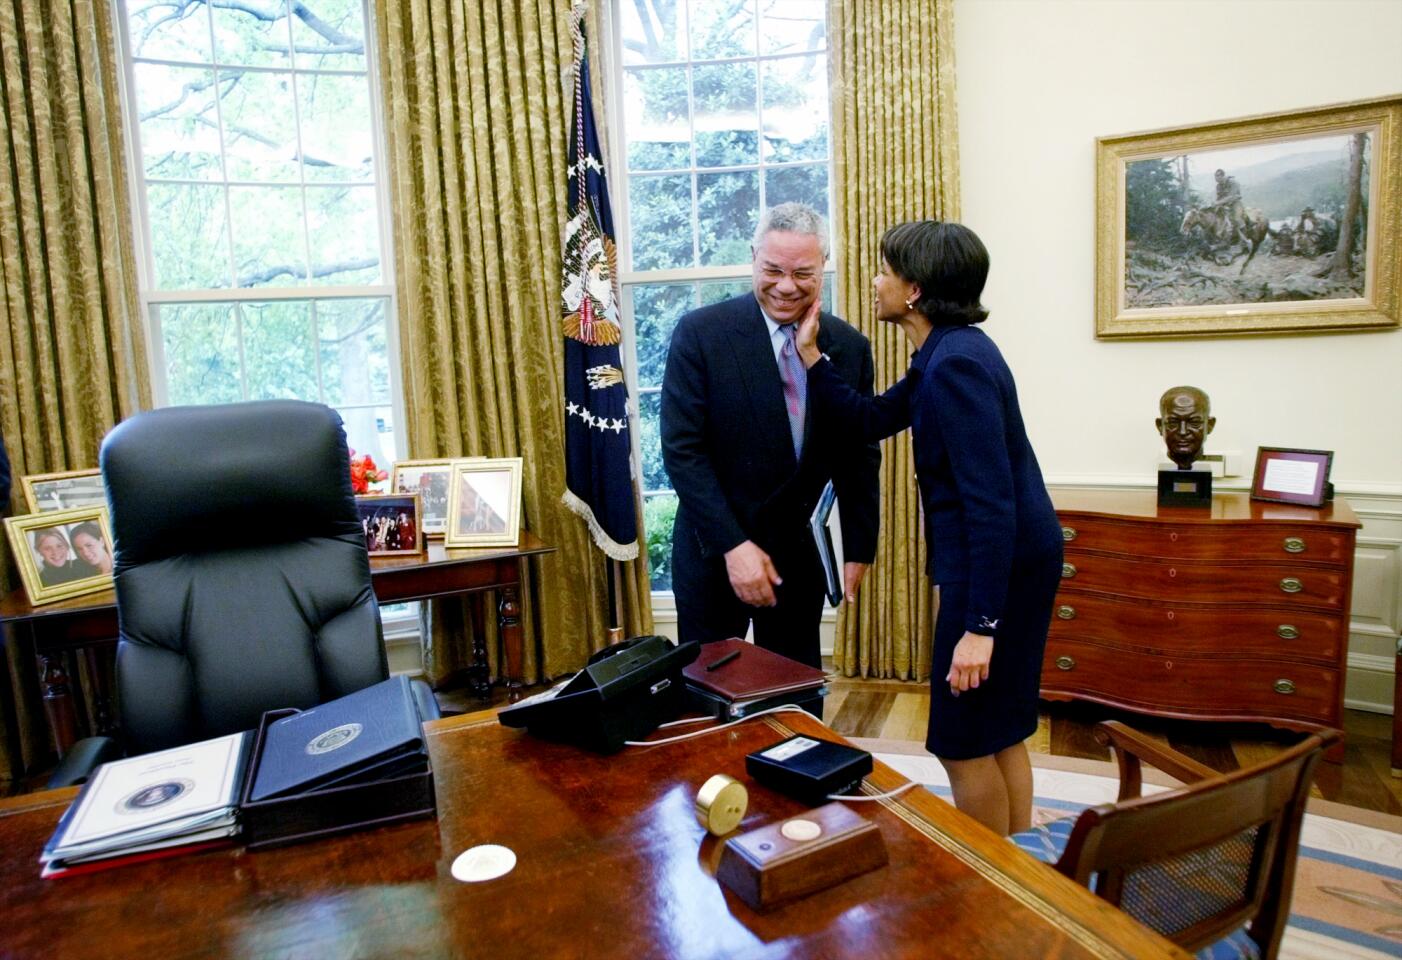 Secretary of State Colin Powell receives a pat on the cheek from Condoleezza Rice in an office.